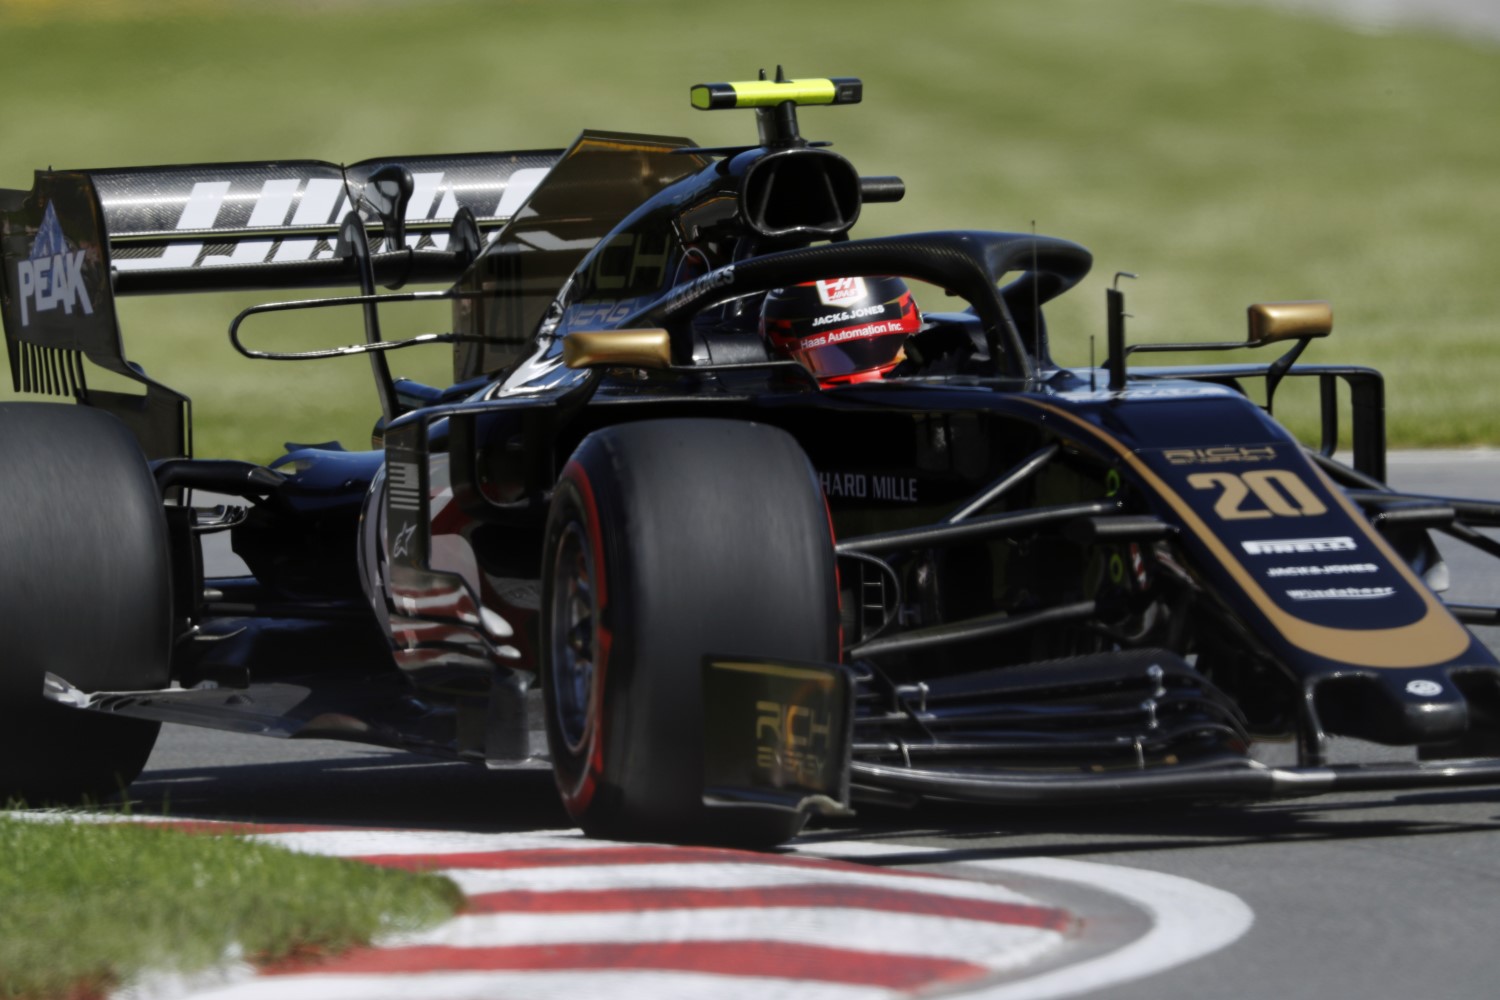 Kevin Magnussen's Haas shod with the made-for Mercedes Pirelli tires